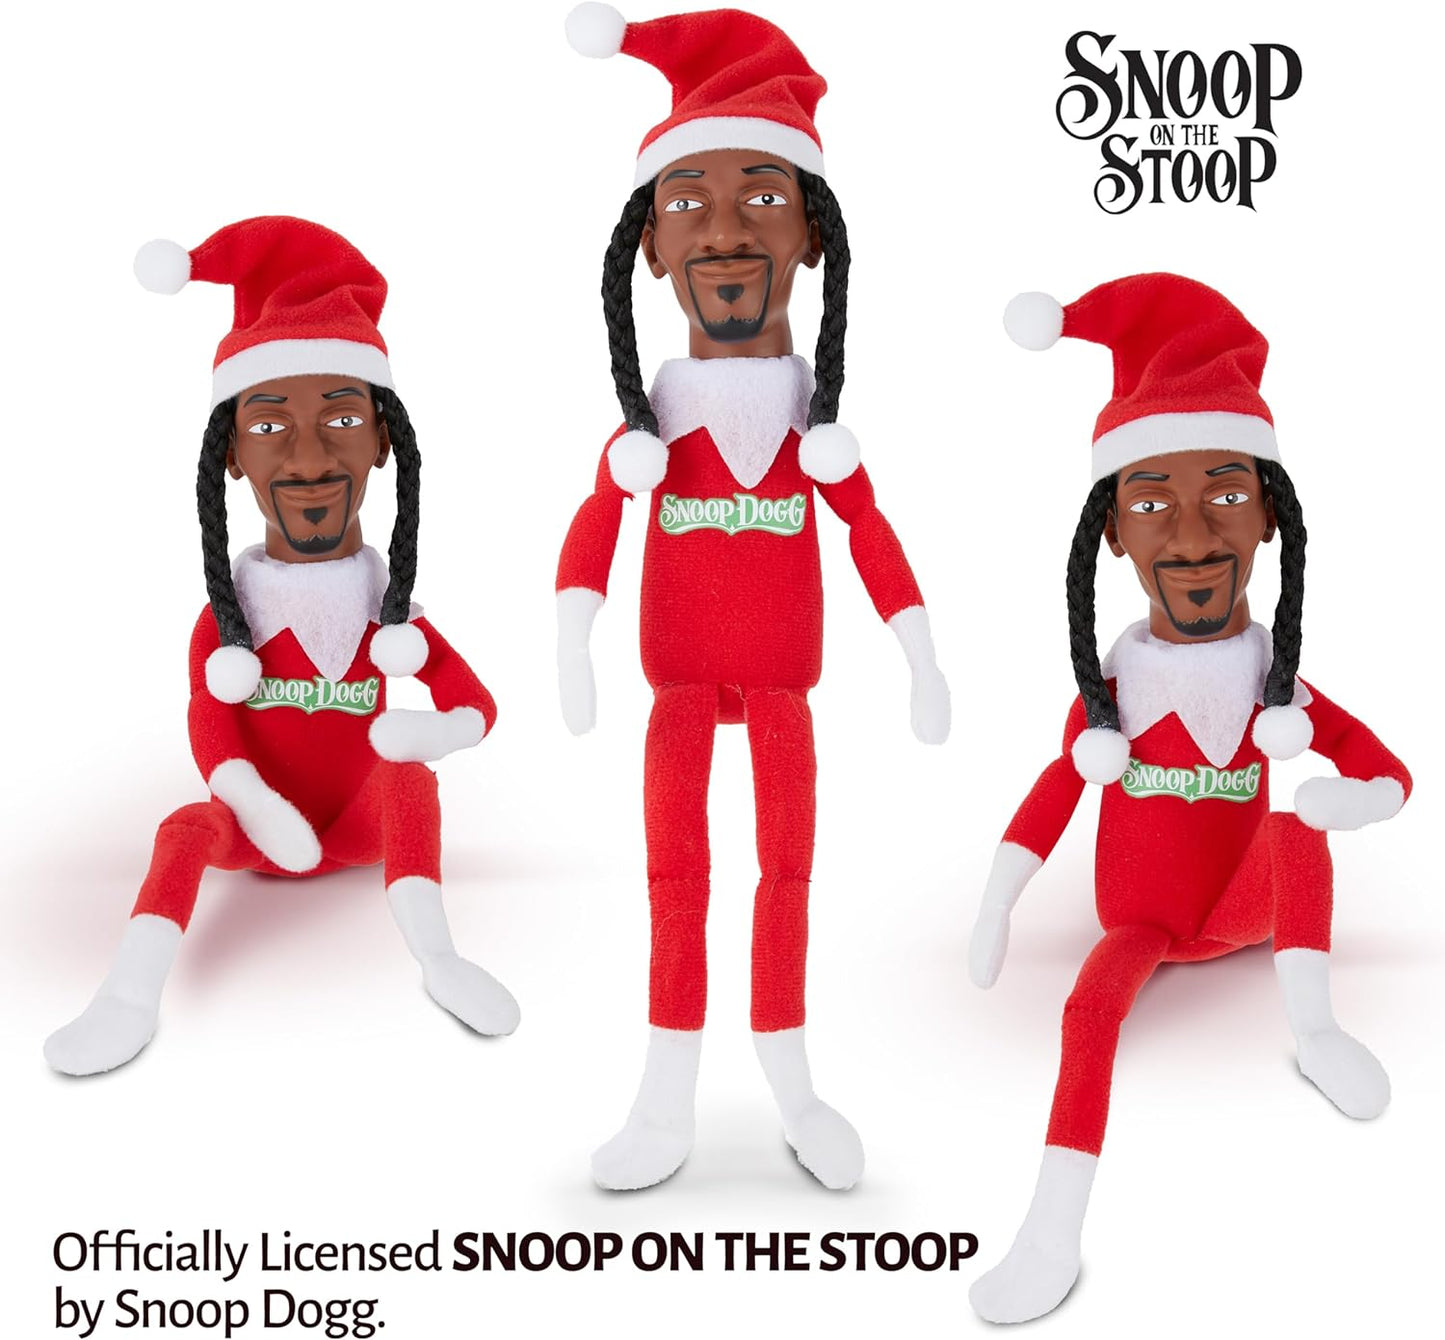 Snoop Dogg Snoop on a Stoop 2023 Christmas Elf Doll, 12” Small Plush Toys Shelf Decor, Includes Elf Toy, Extra Tshirt, Sunglasses and Necklace, Christman Gifts for Men & Women.